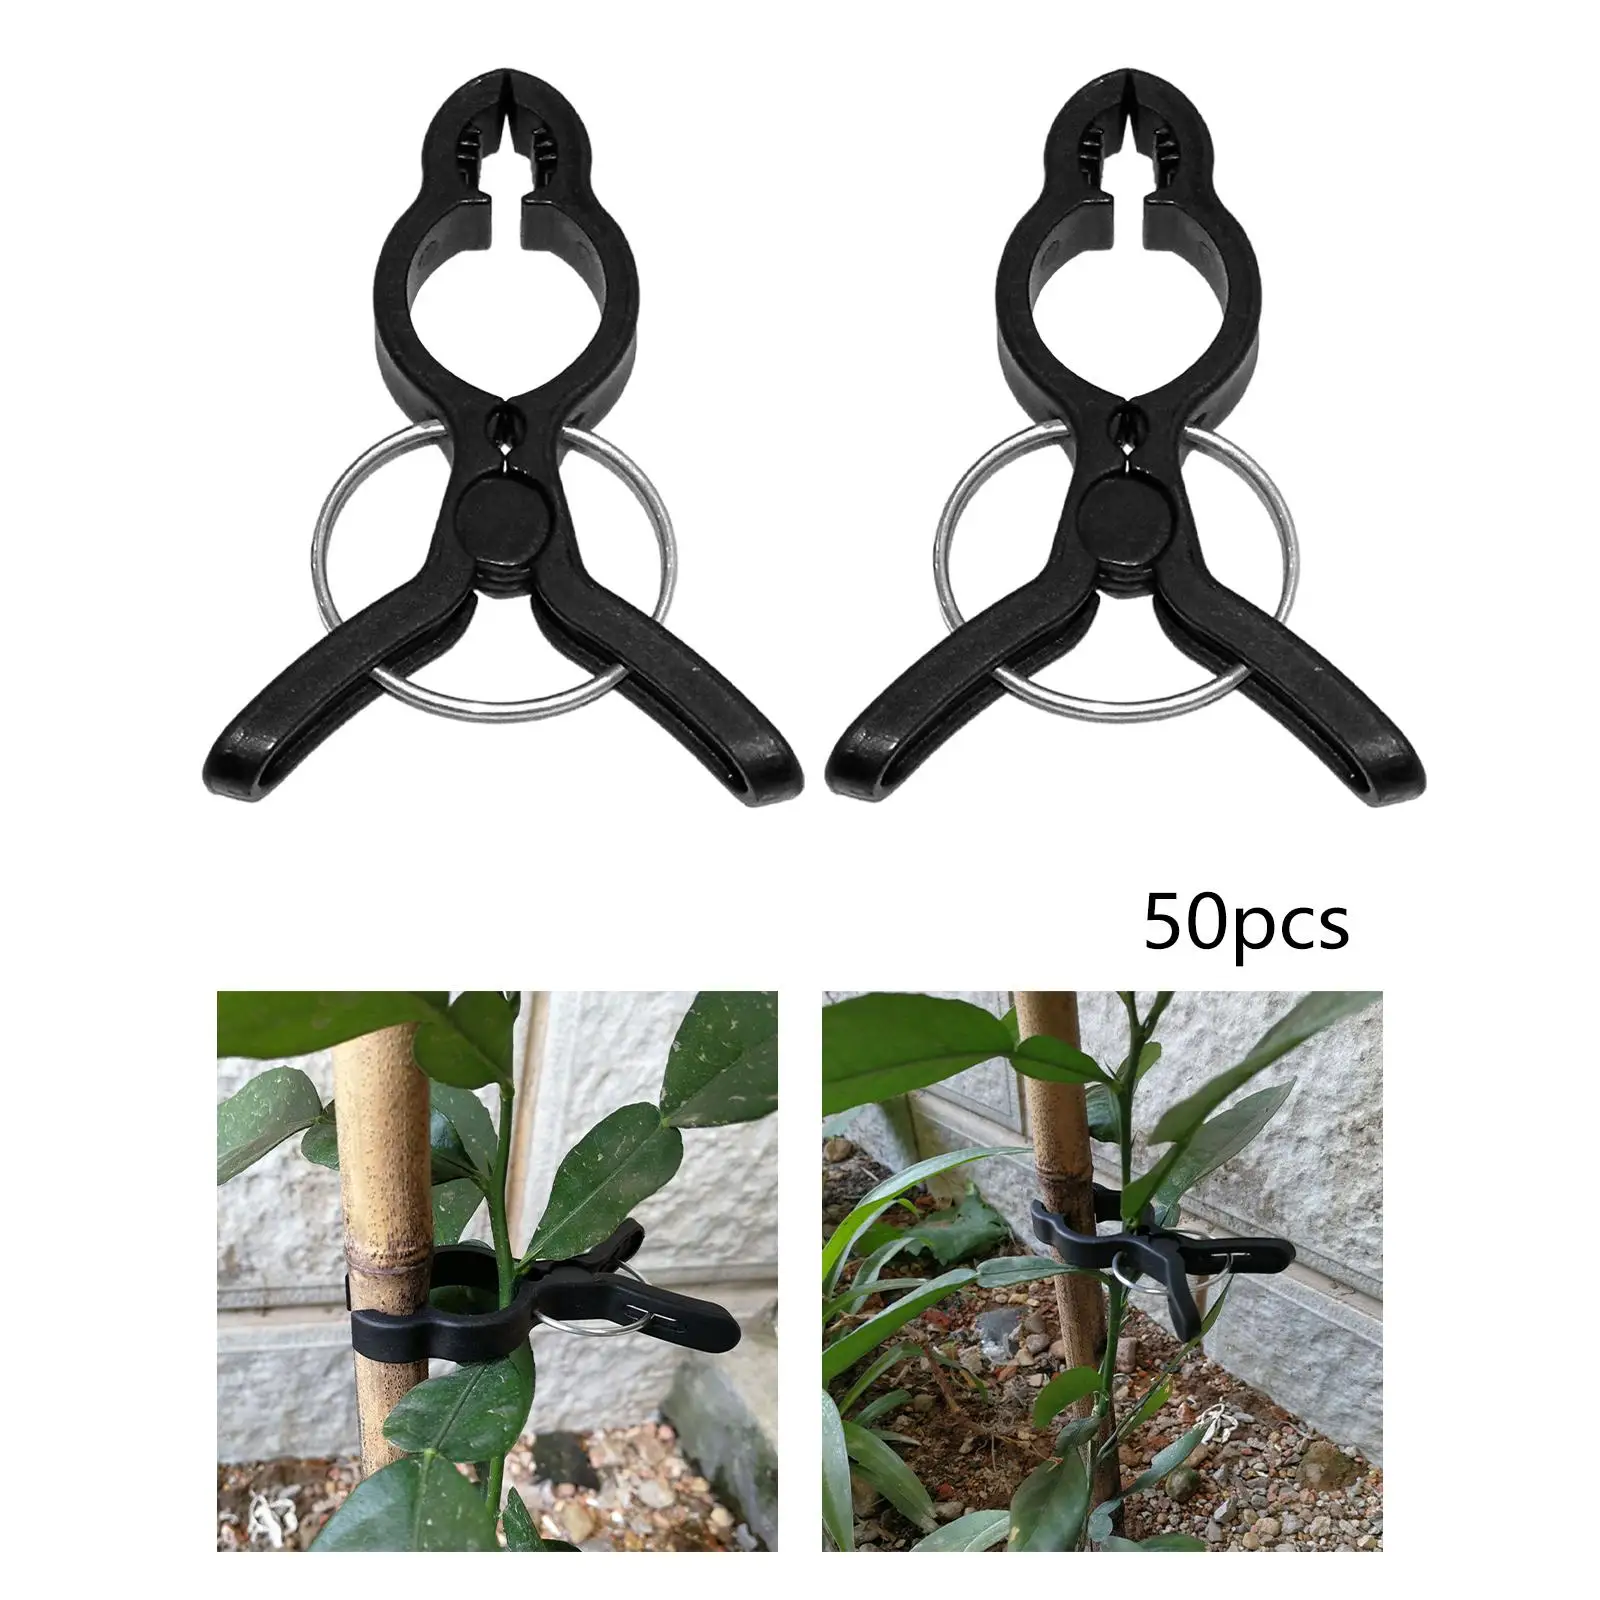 50 Pieces Garden Plant Support Clips Plants Trellis Vegetables Plants Trellis Clips for Gardening Yard Straightening Tomato Cage